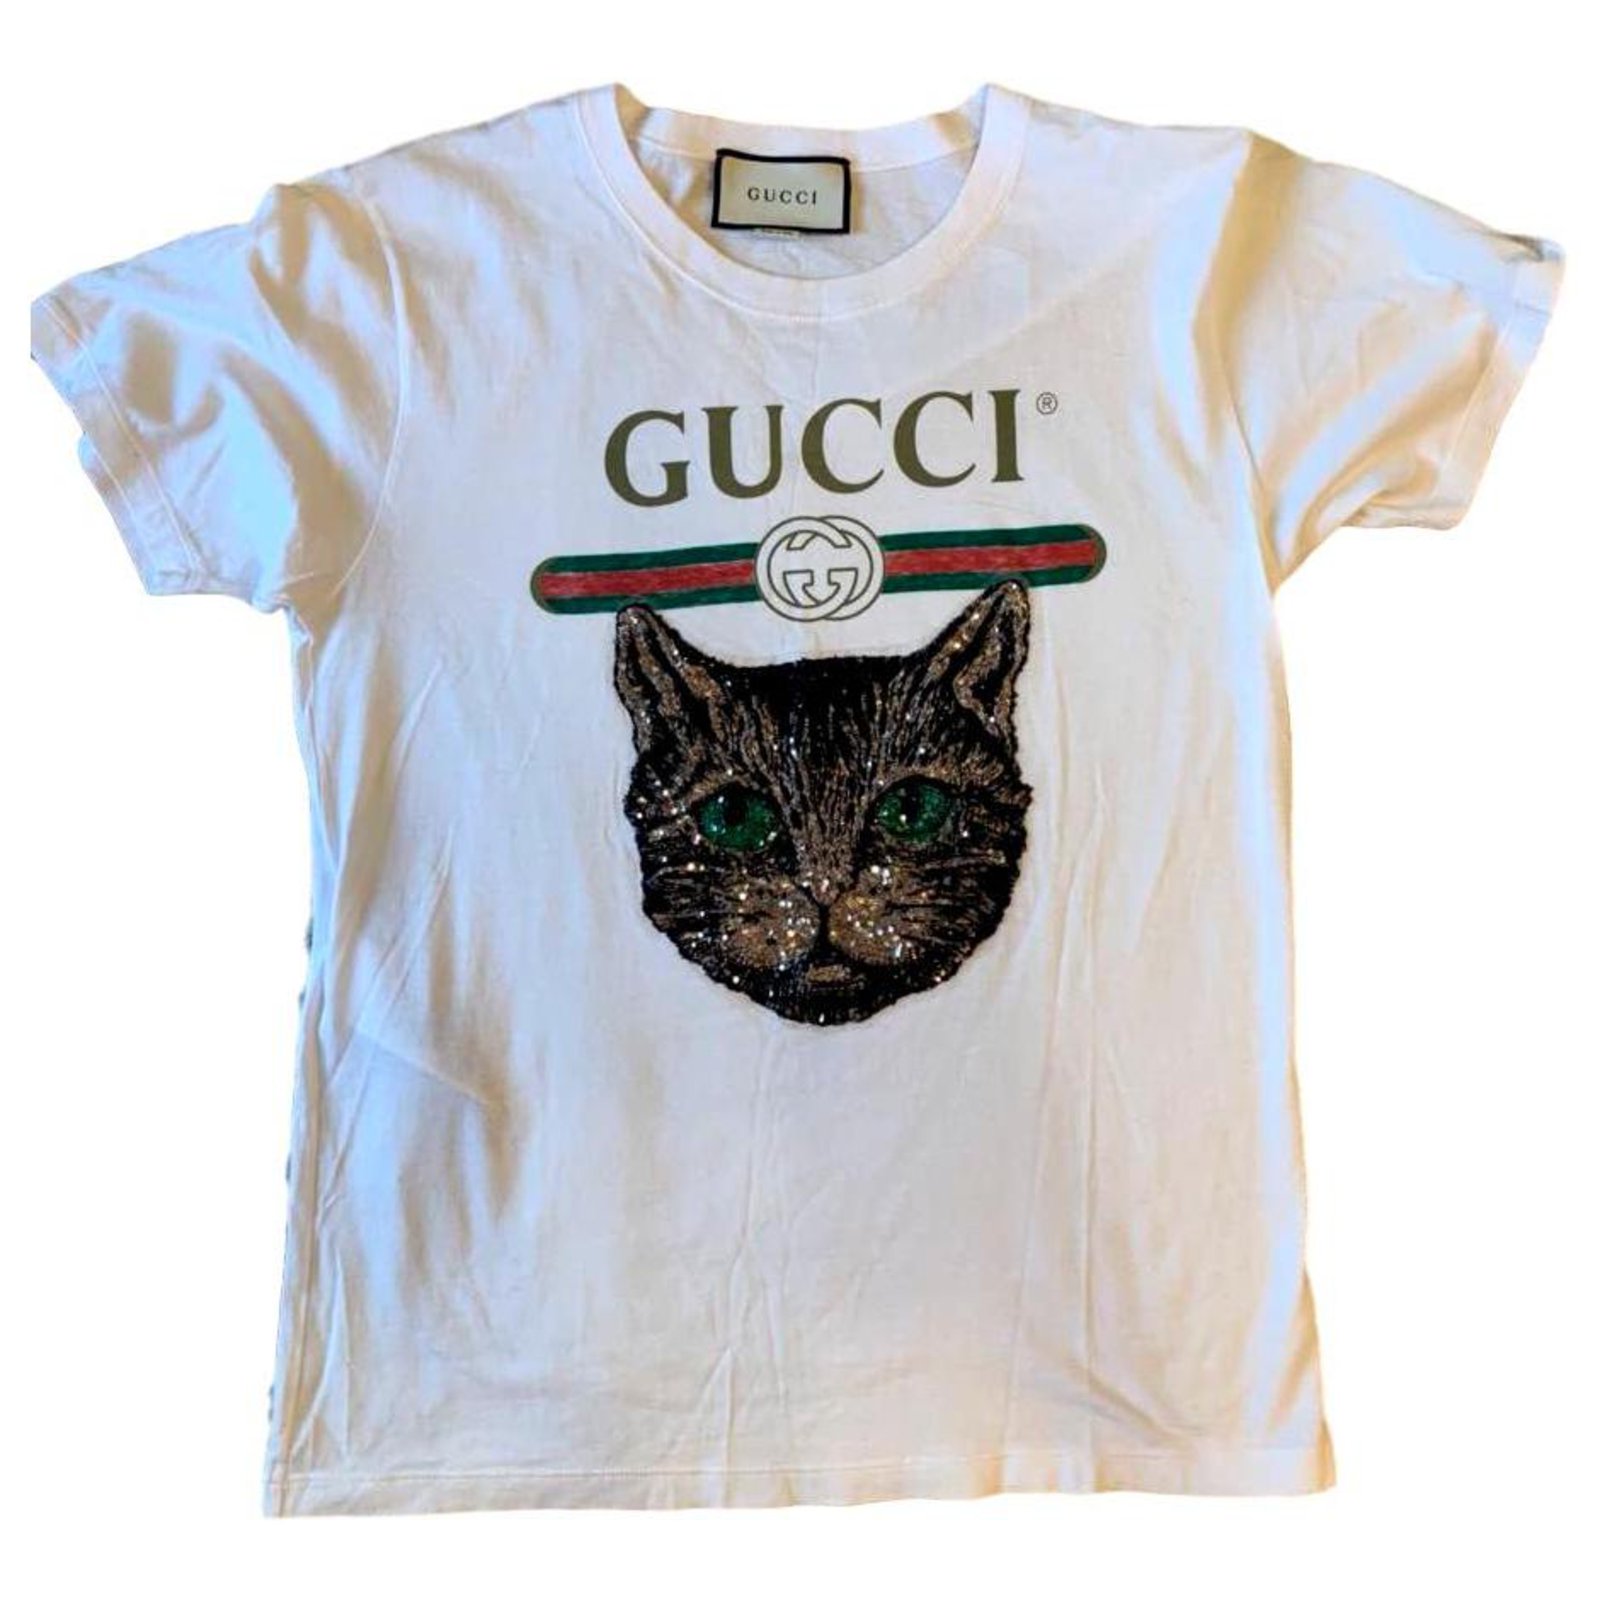 gucci shirt with cat